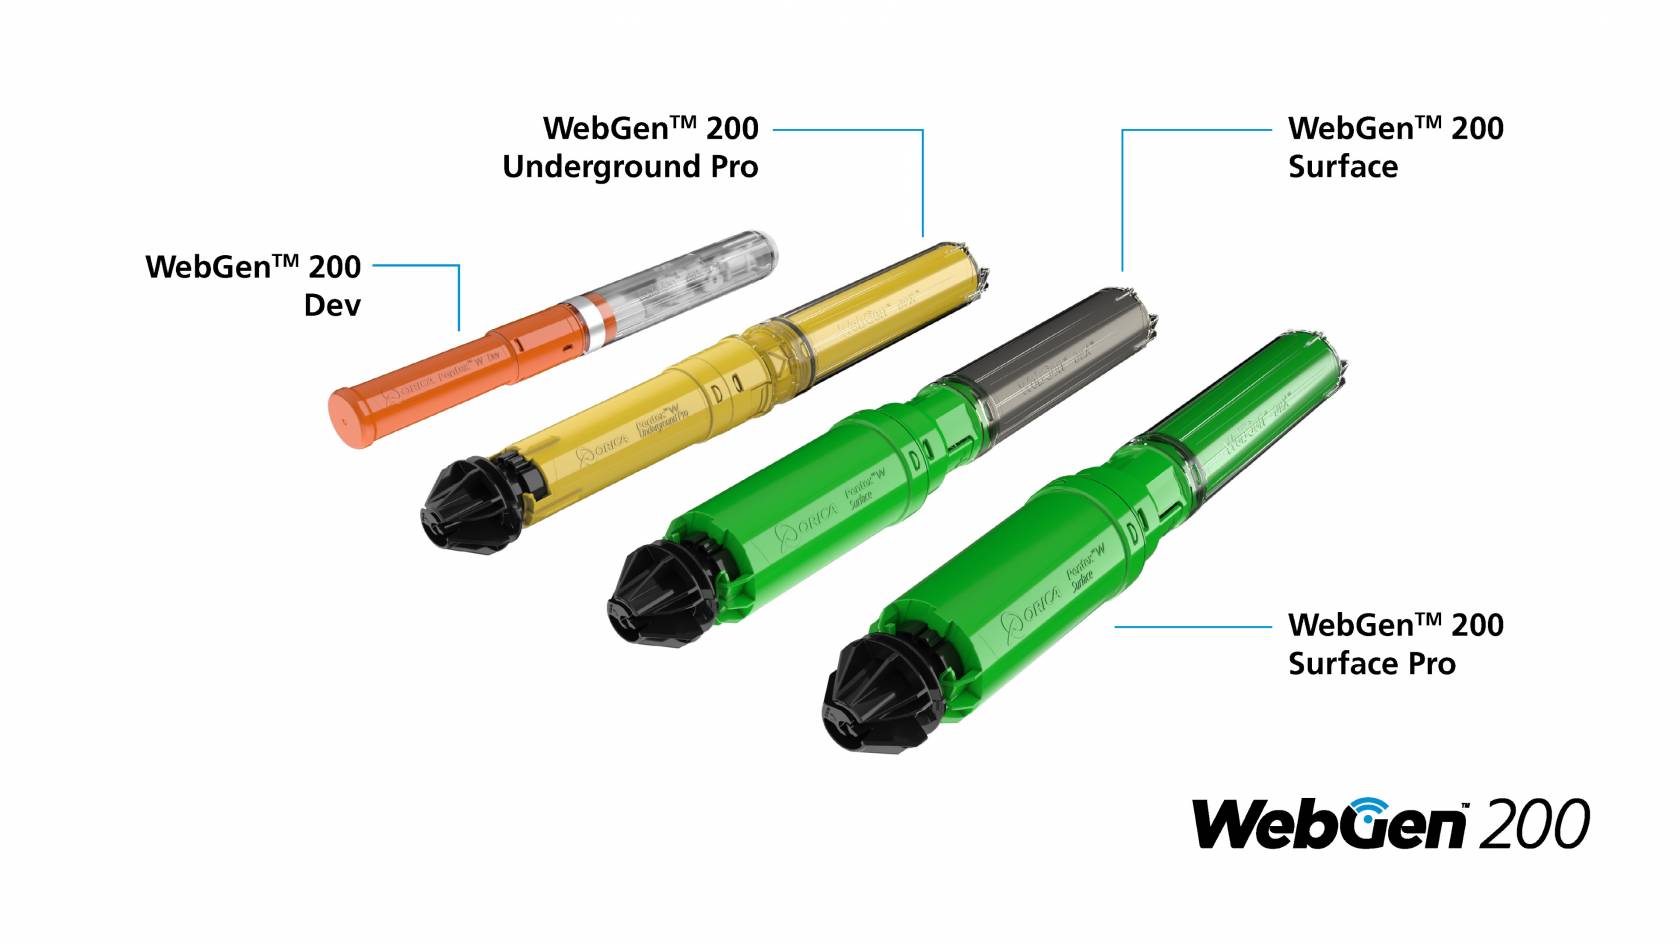 The new WebGen™ 200 suite of fully wireless initiating systems